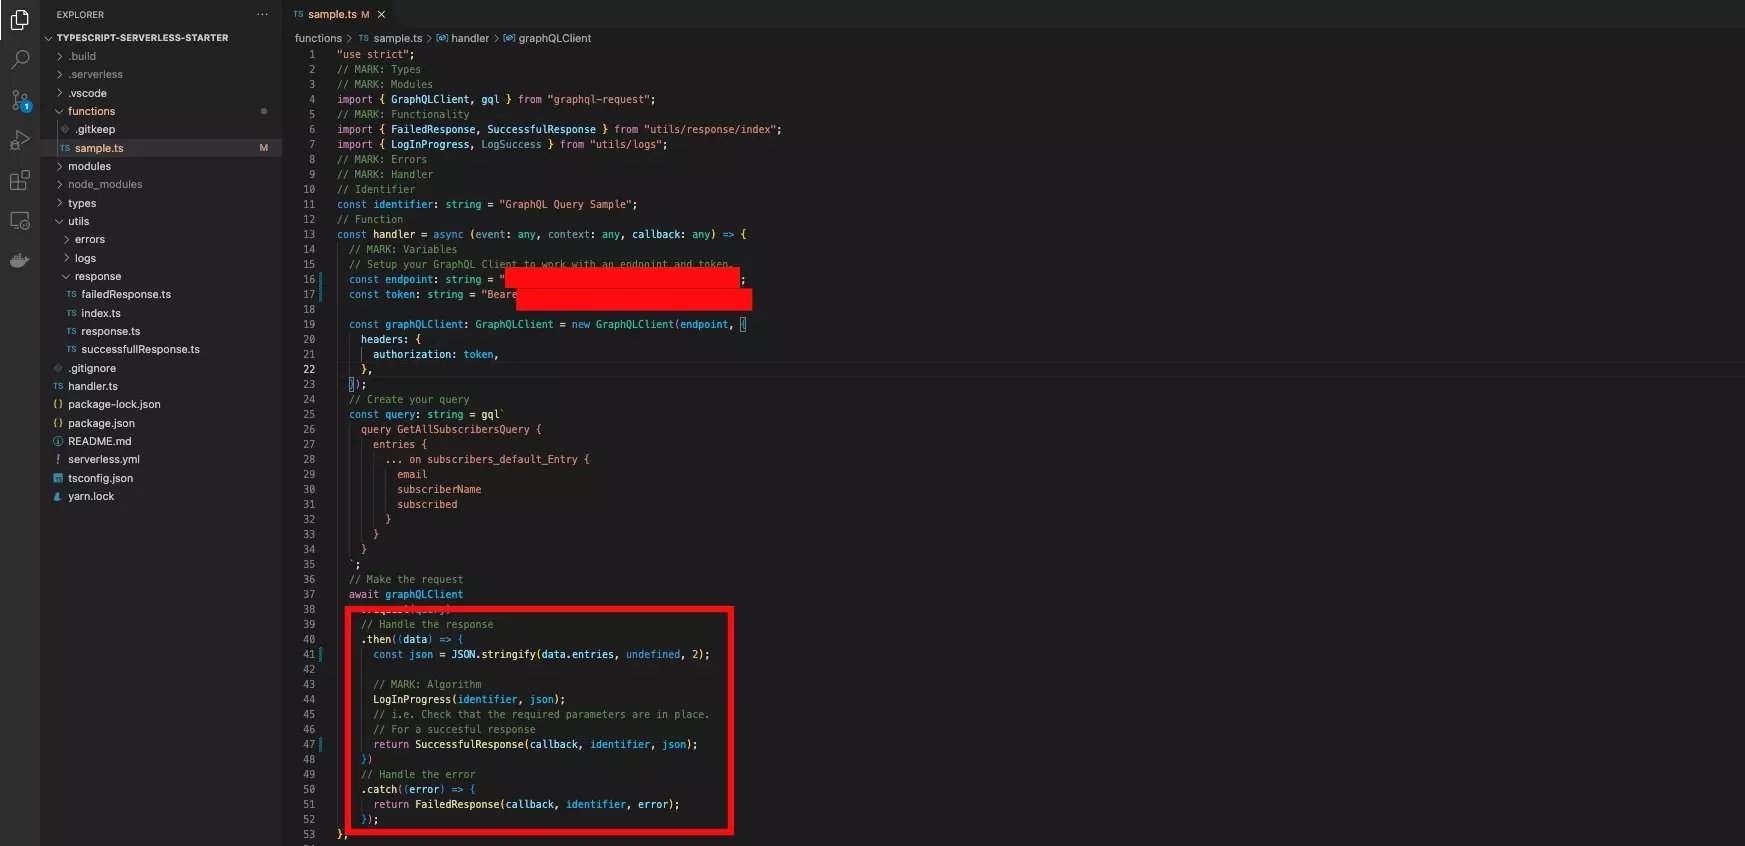 A screenshot of VSCode showing you how to make the GraphQL request and handle its response. Sample code available below.